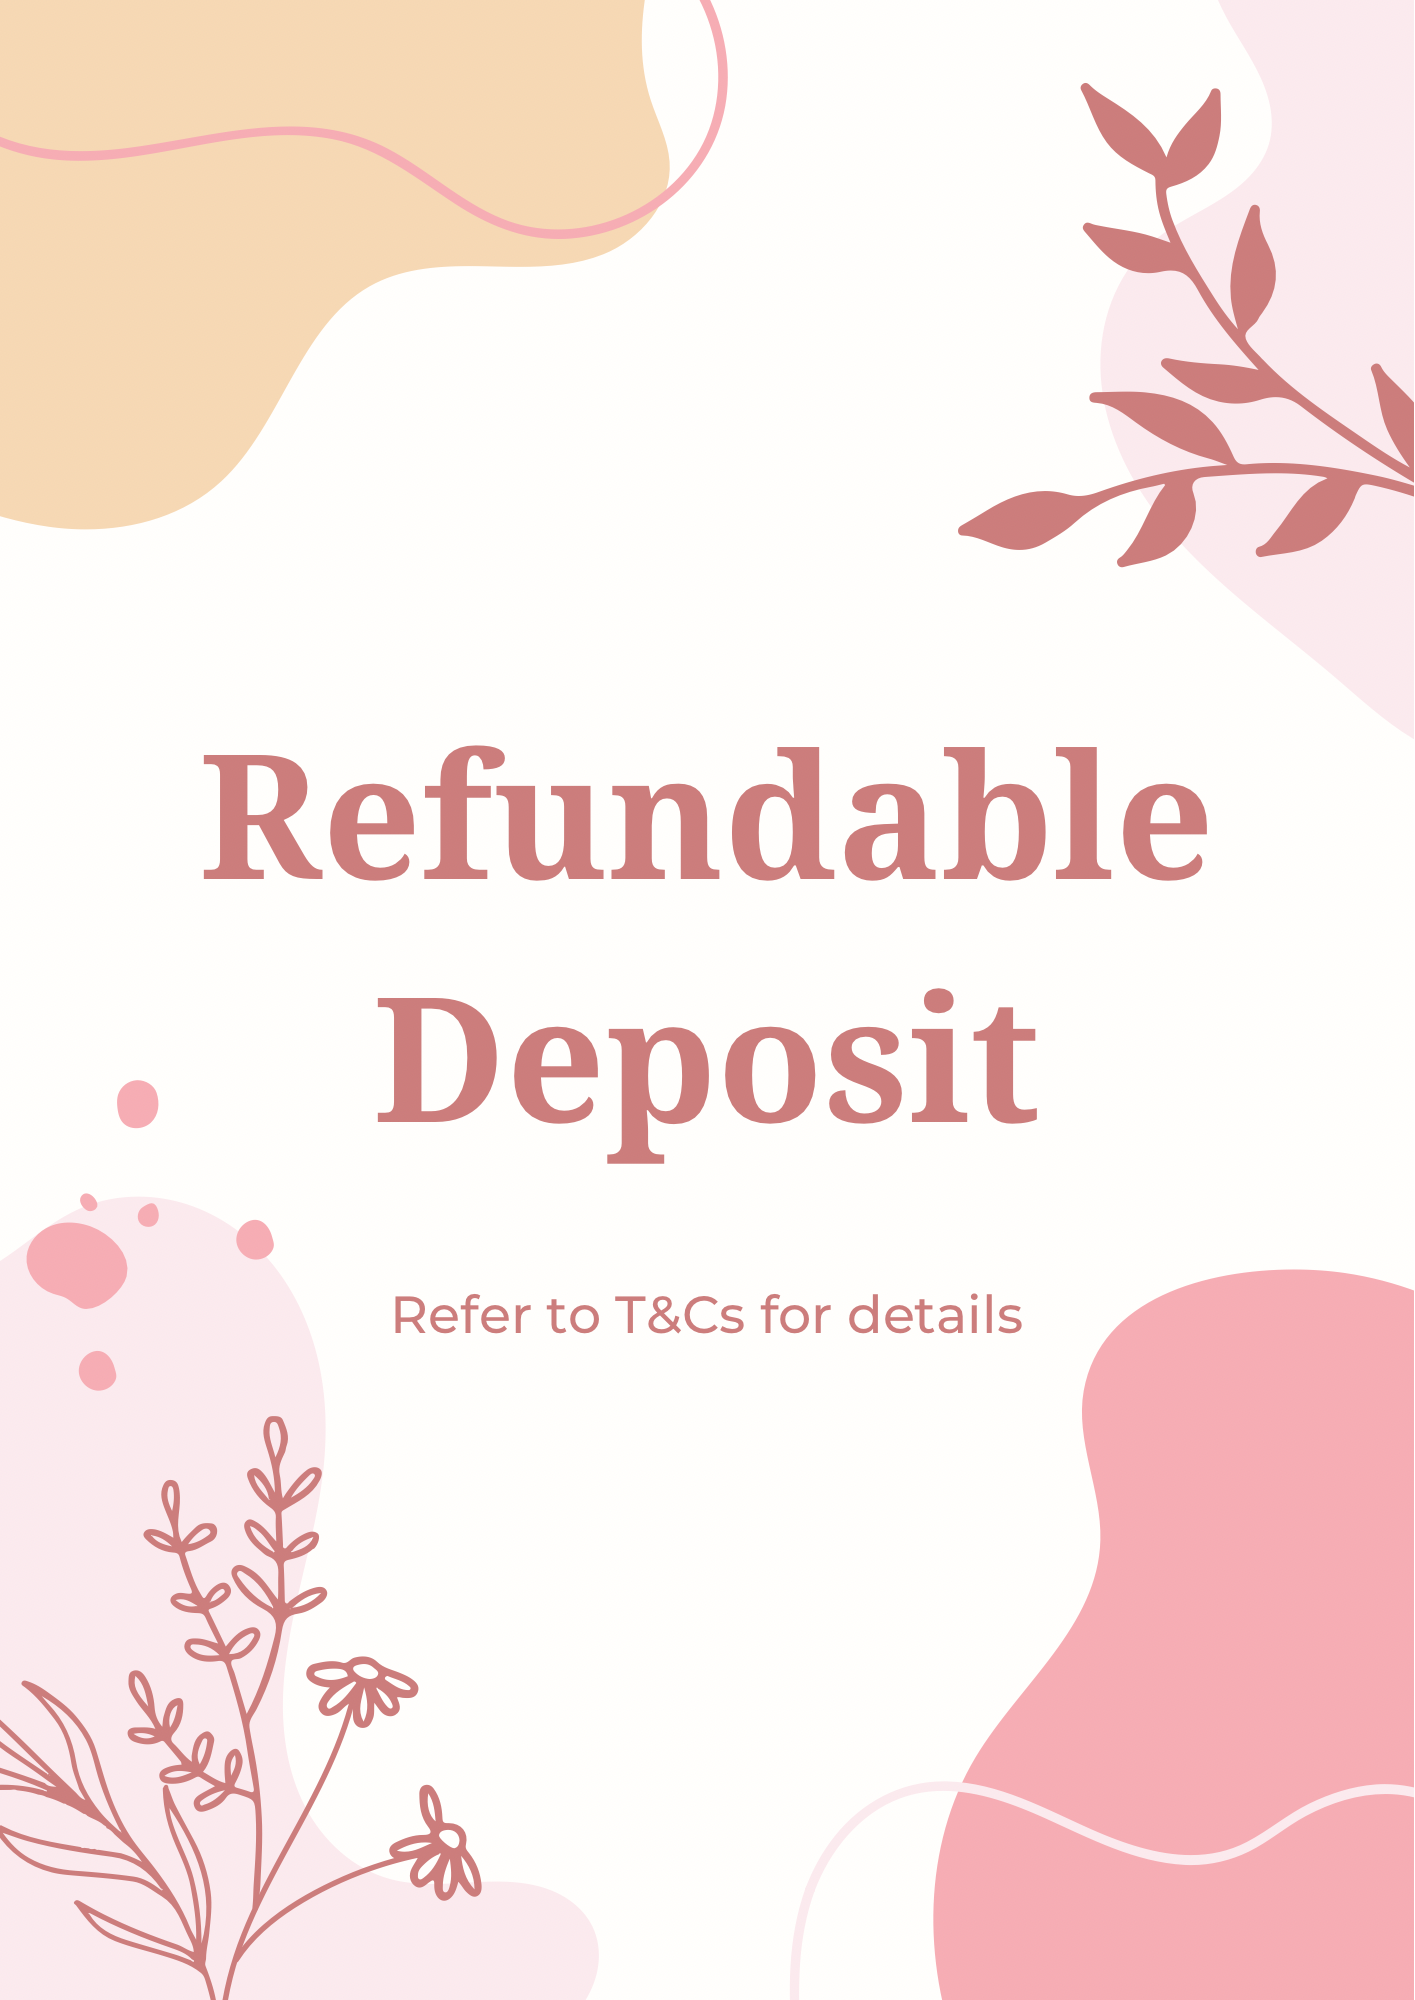 Refundable Deposit - Little Frog XL (Toddler to Preschooler - up to 7 years old!)